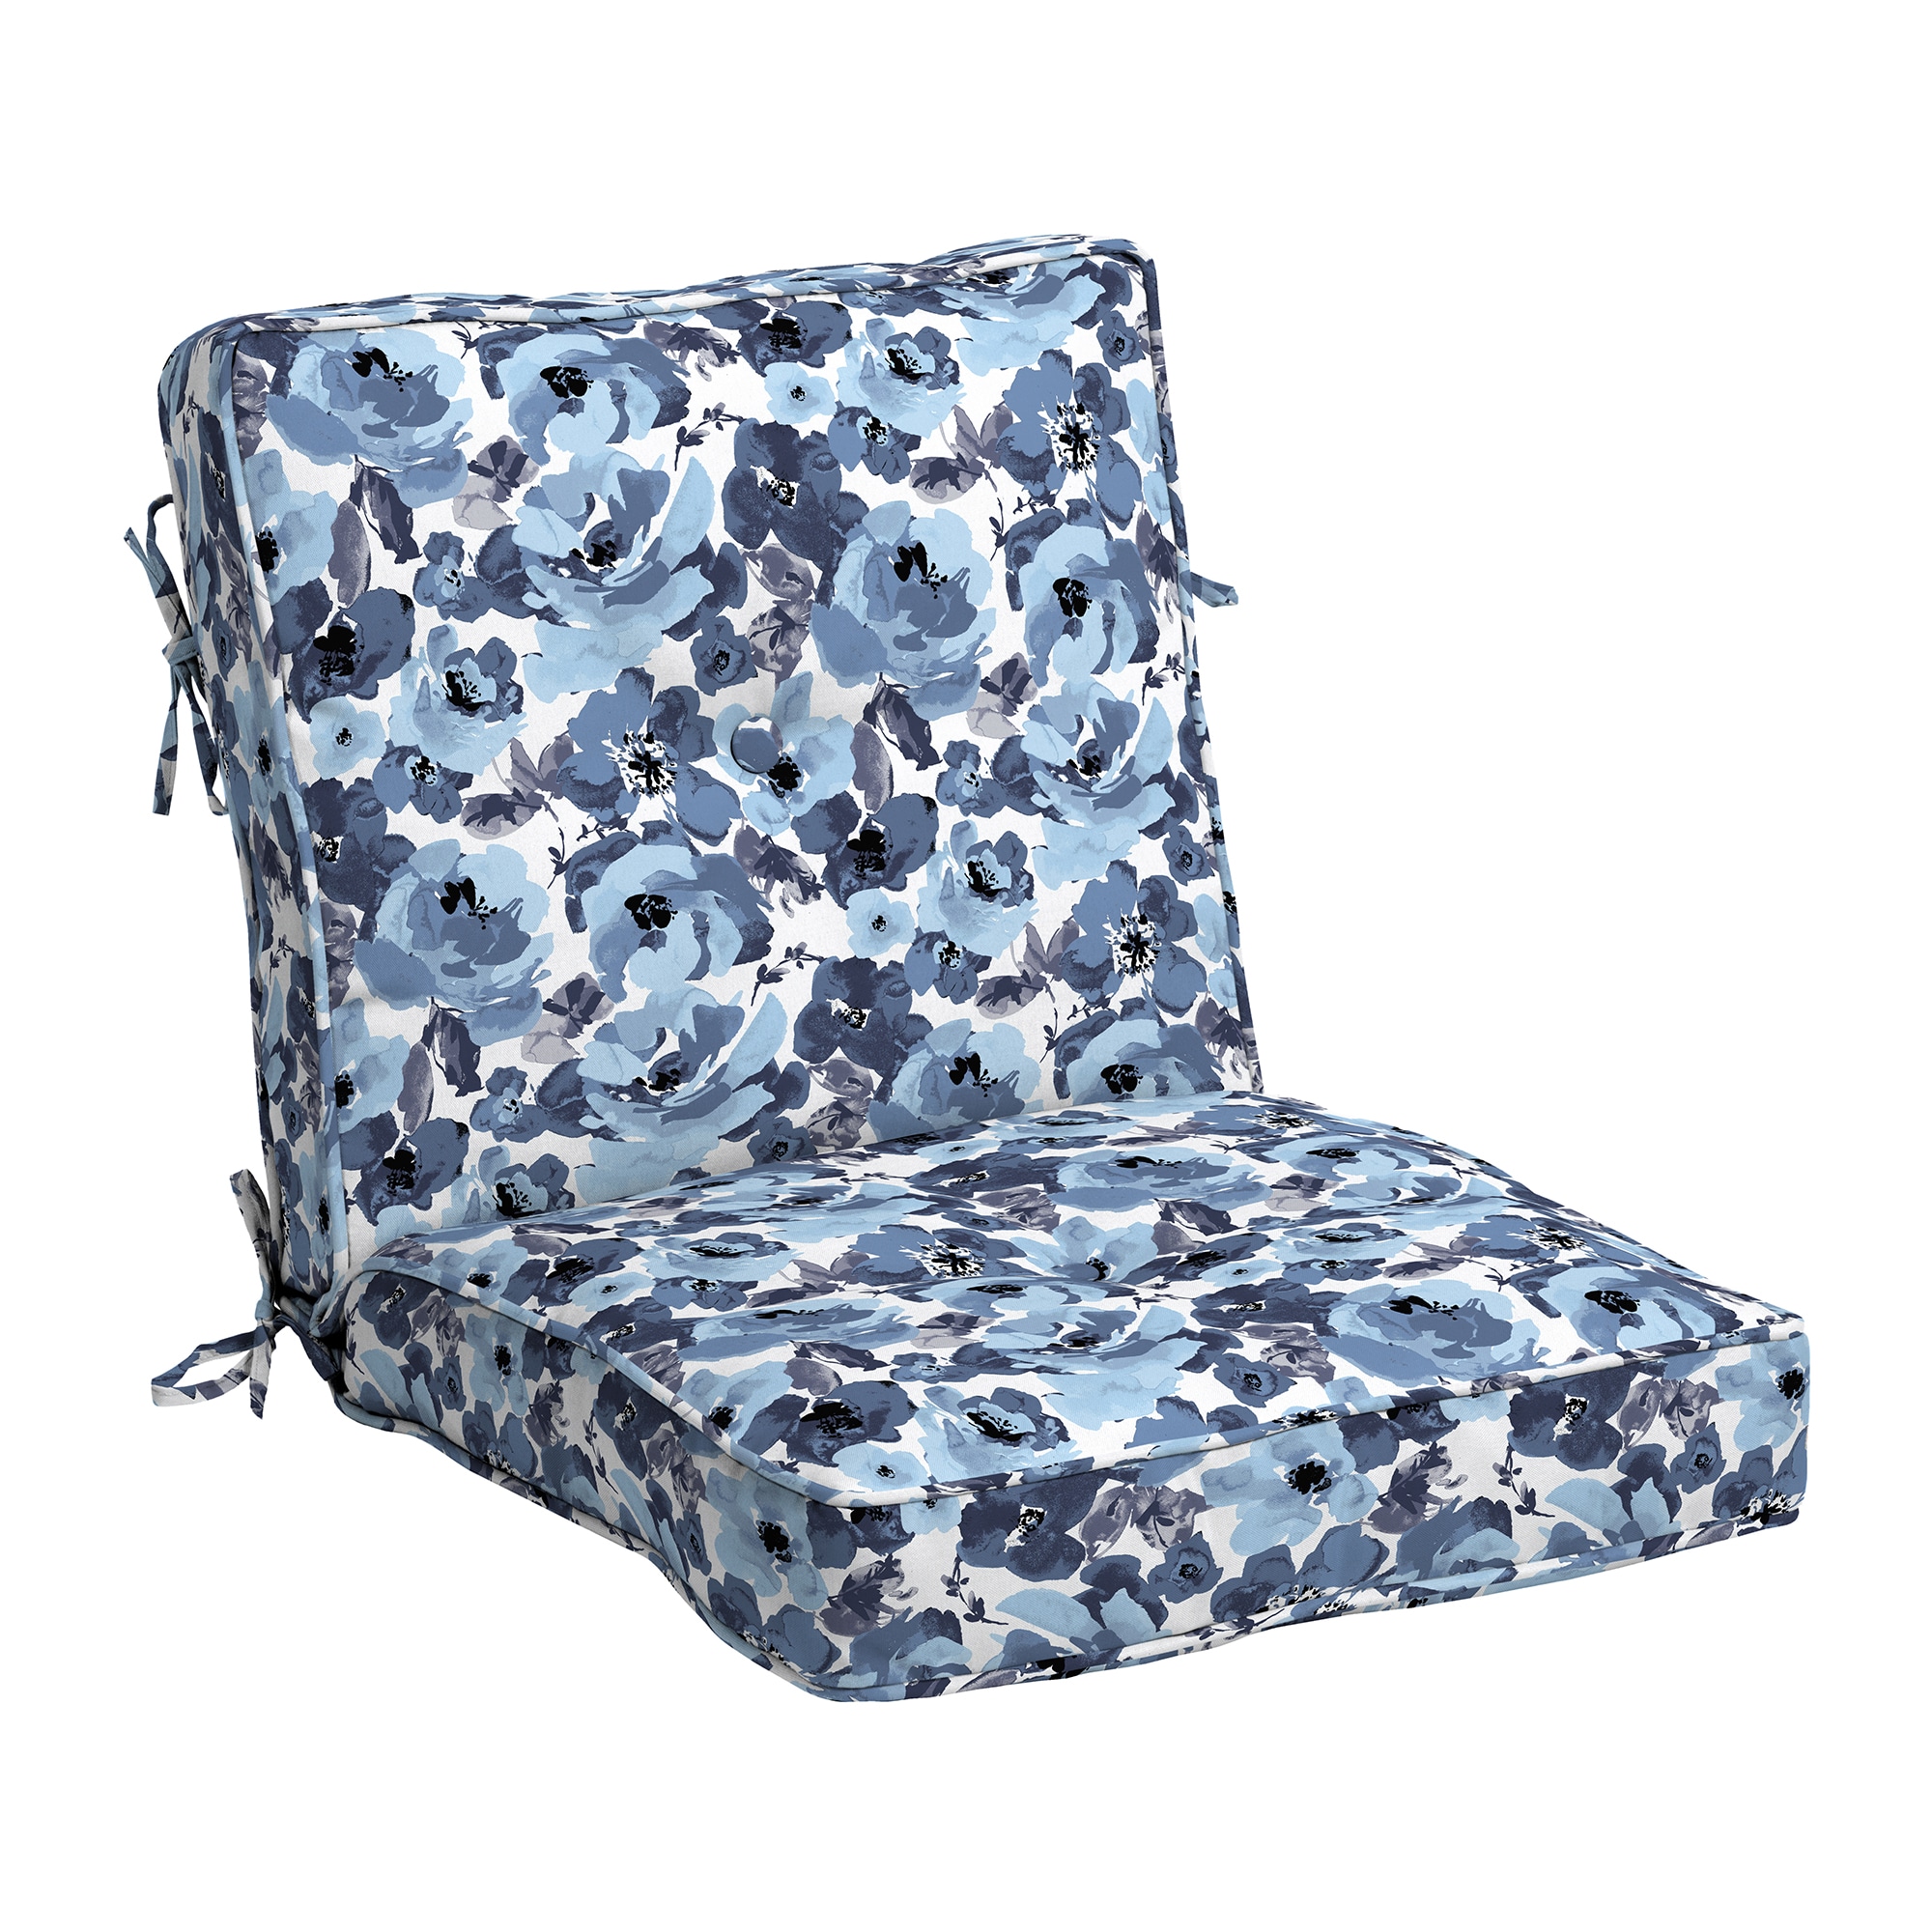 Arden Selections Plush BlowFill 20 x 21 in. Outdoor Dining Chair Cushion - Clark Blue